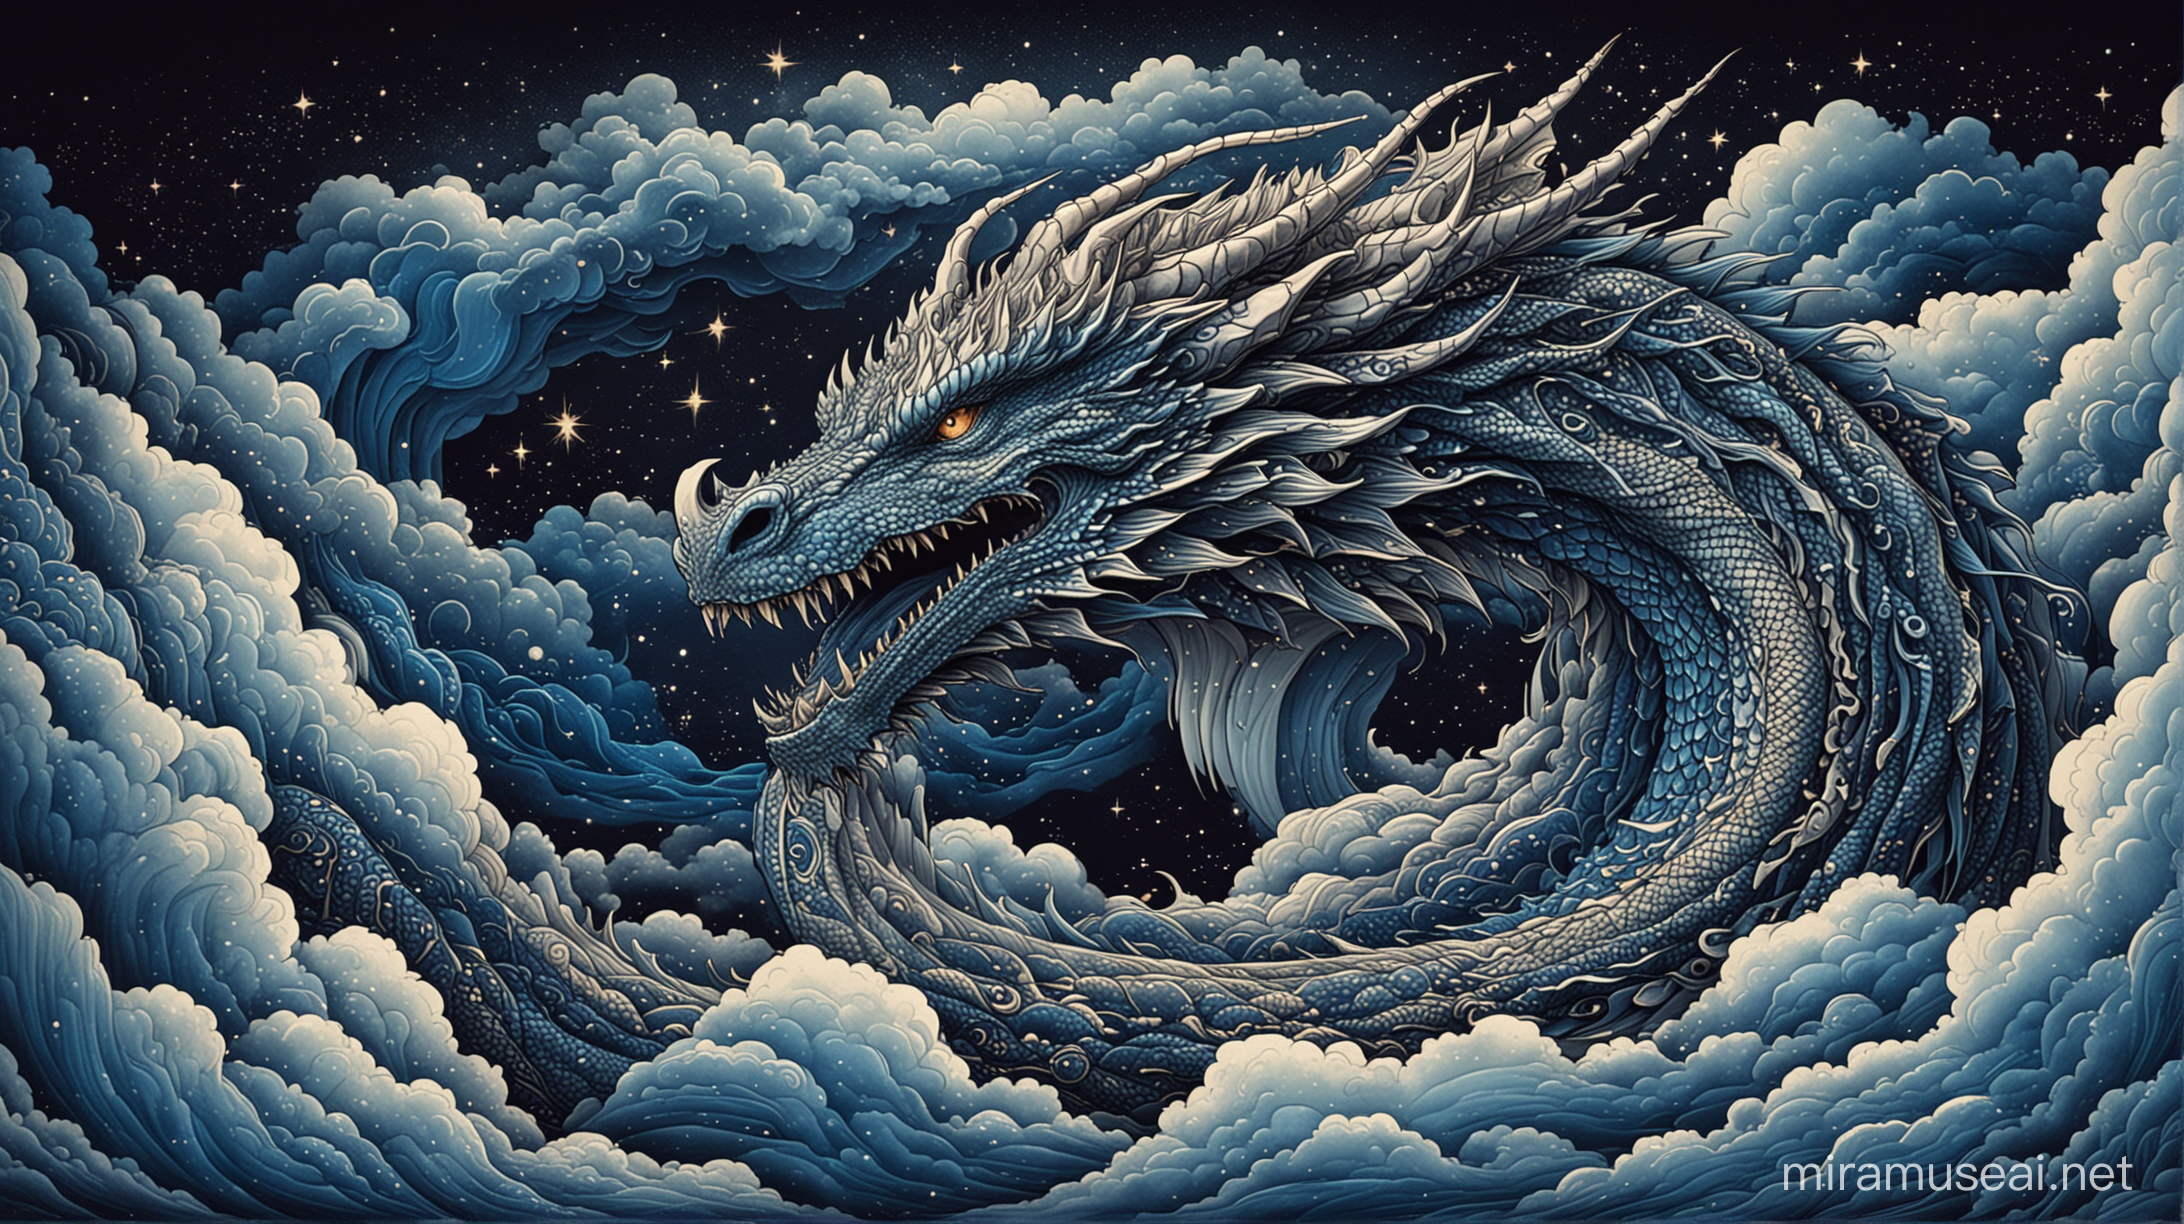 Majestic Dragon Spirit Entwined with Cosmic Motifs